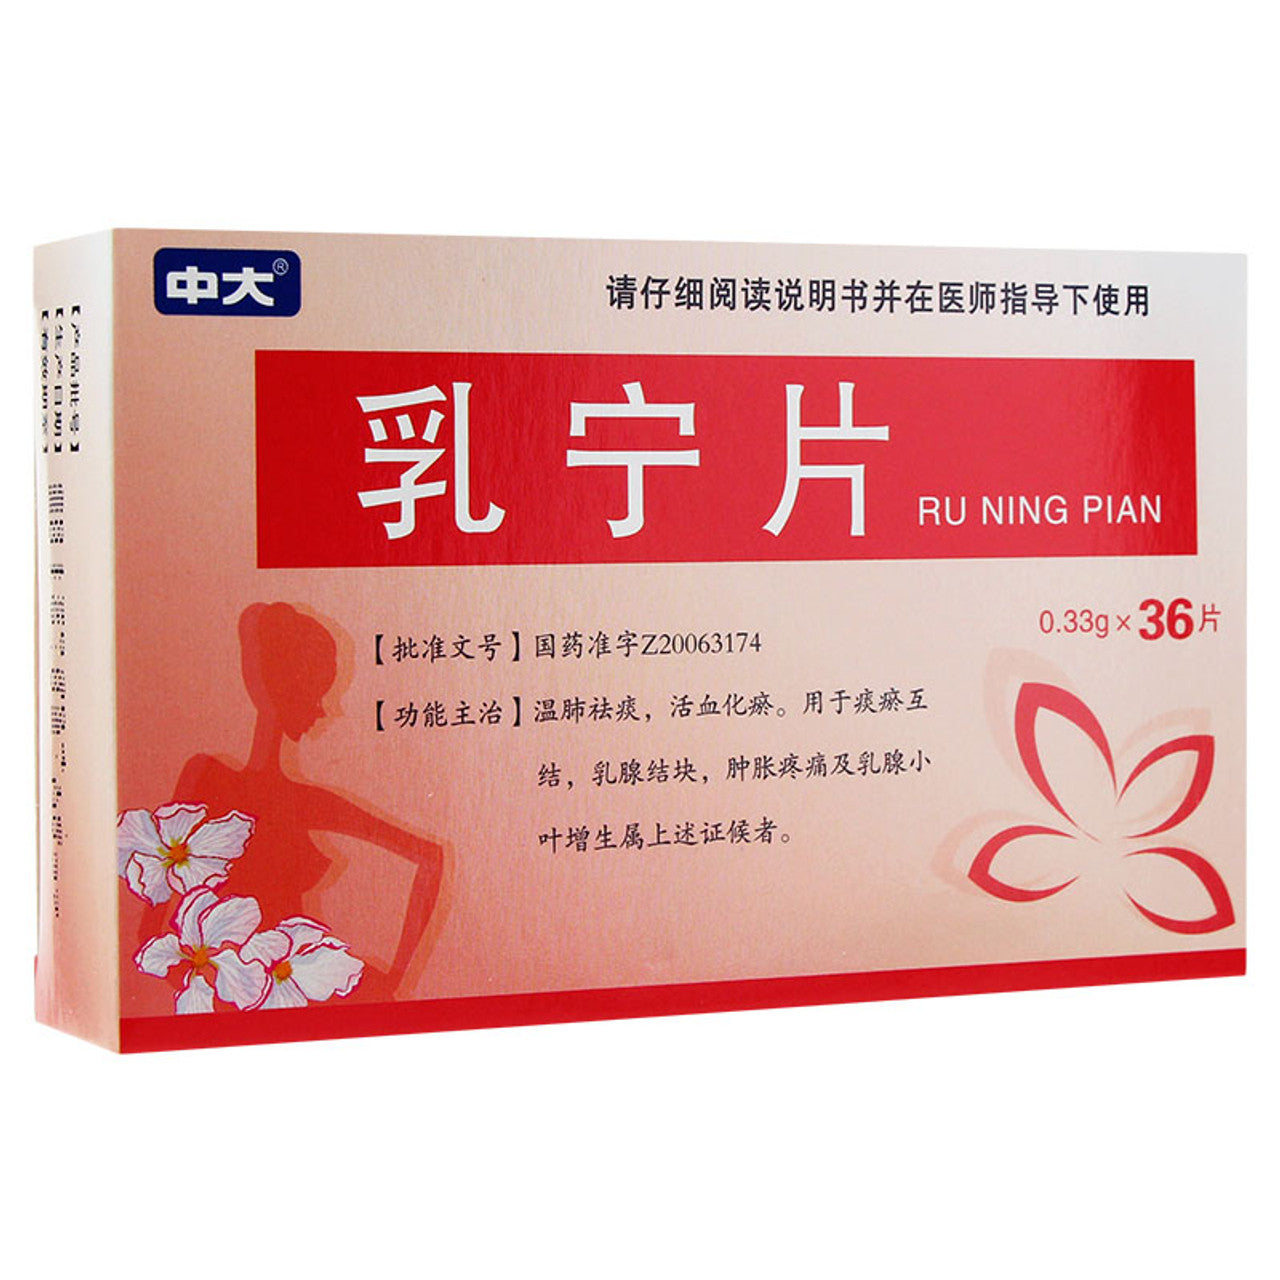 China Herb. Runing Pian or Runing Tablets for phlegm and blood stasis, breast agglomeration, swelling and pain, and breast lobular hyperplasia.. Ru Ning Pian.